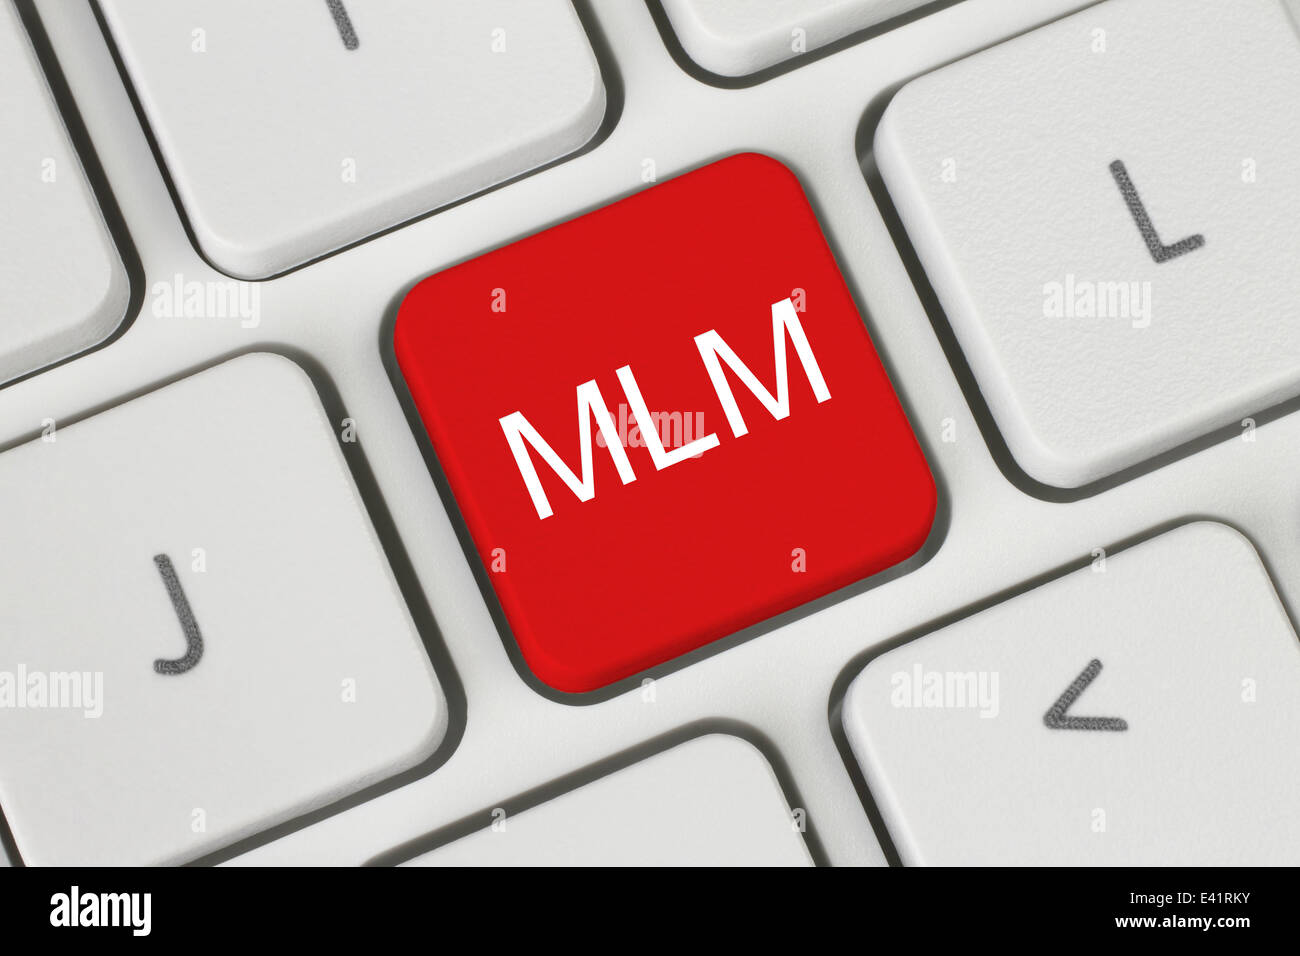 Red MLM (Multi Level Marketing) button on keyboard close-up Stock Photo